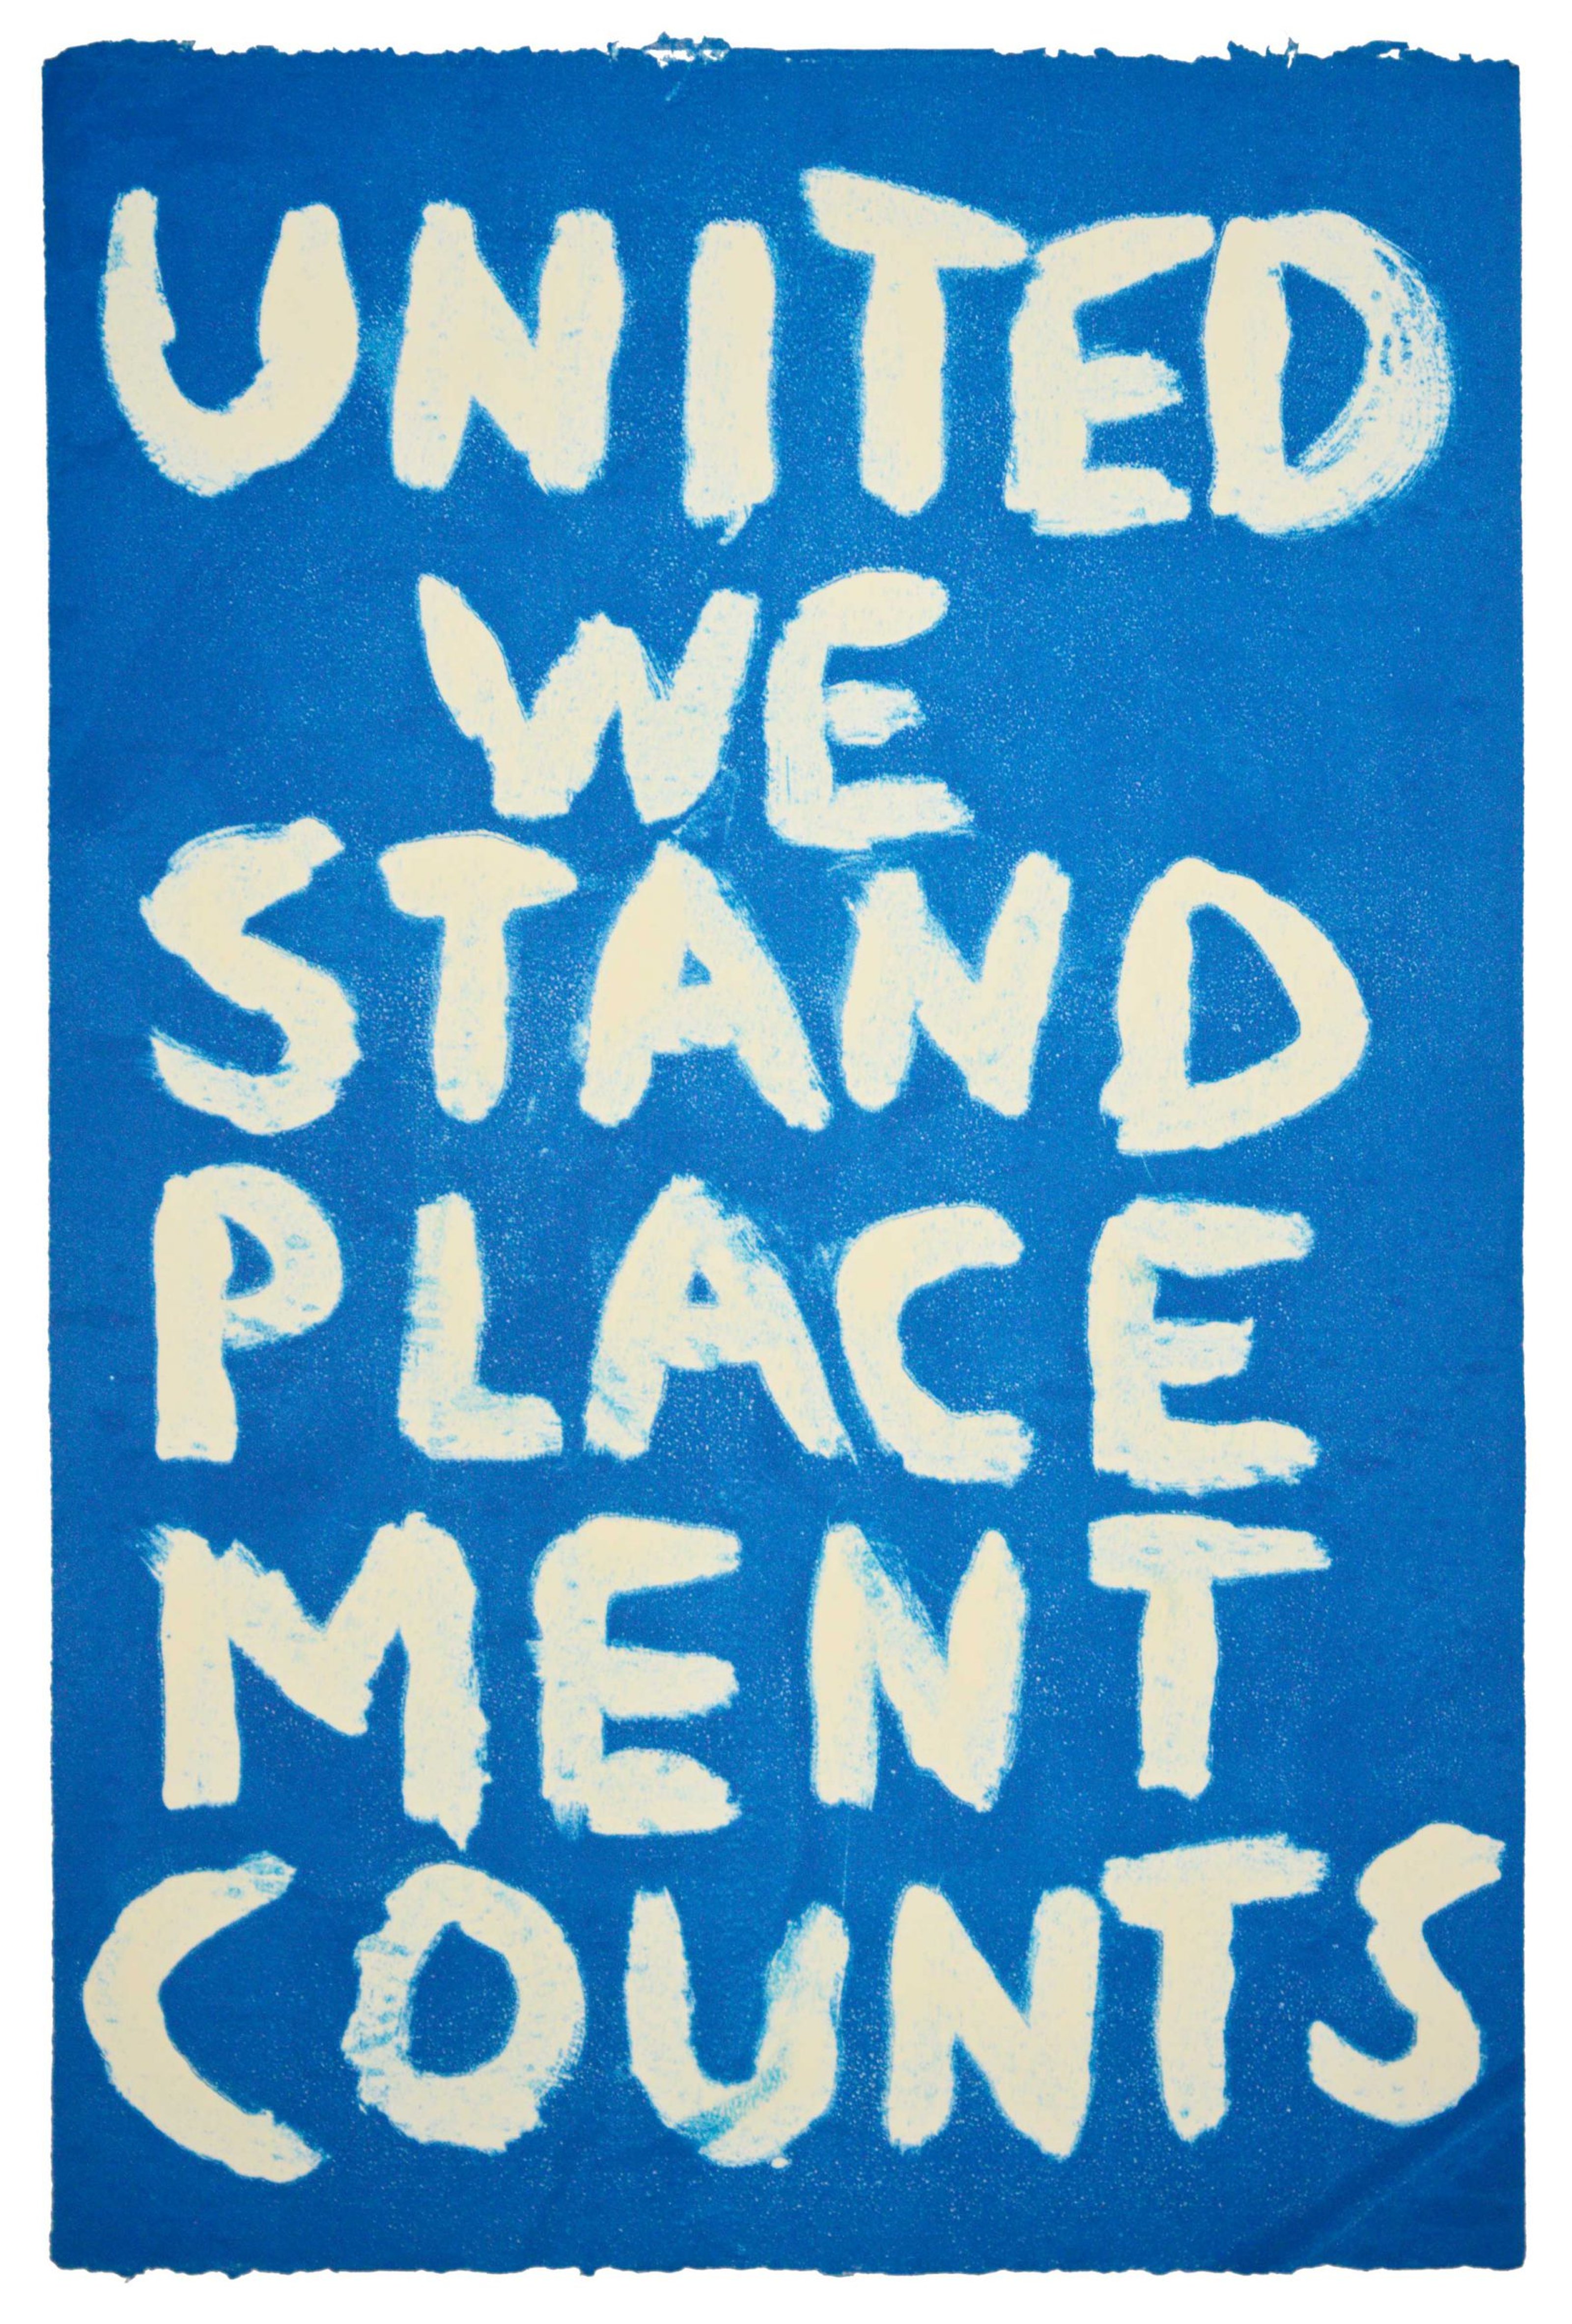 Print: United We Stand Place Ment Counts